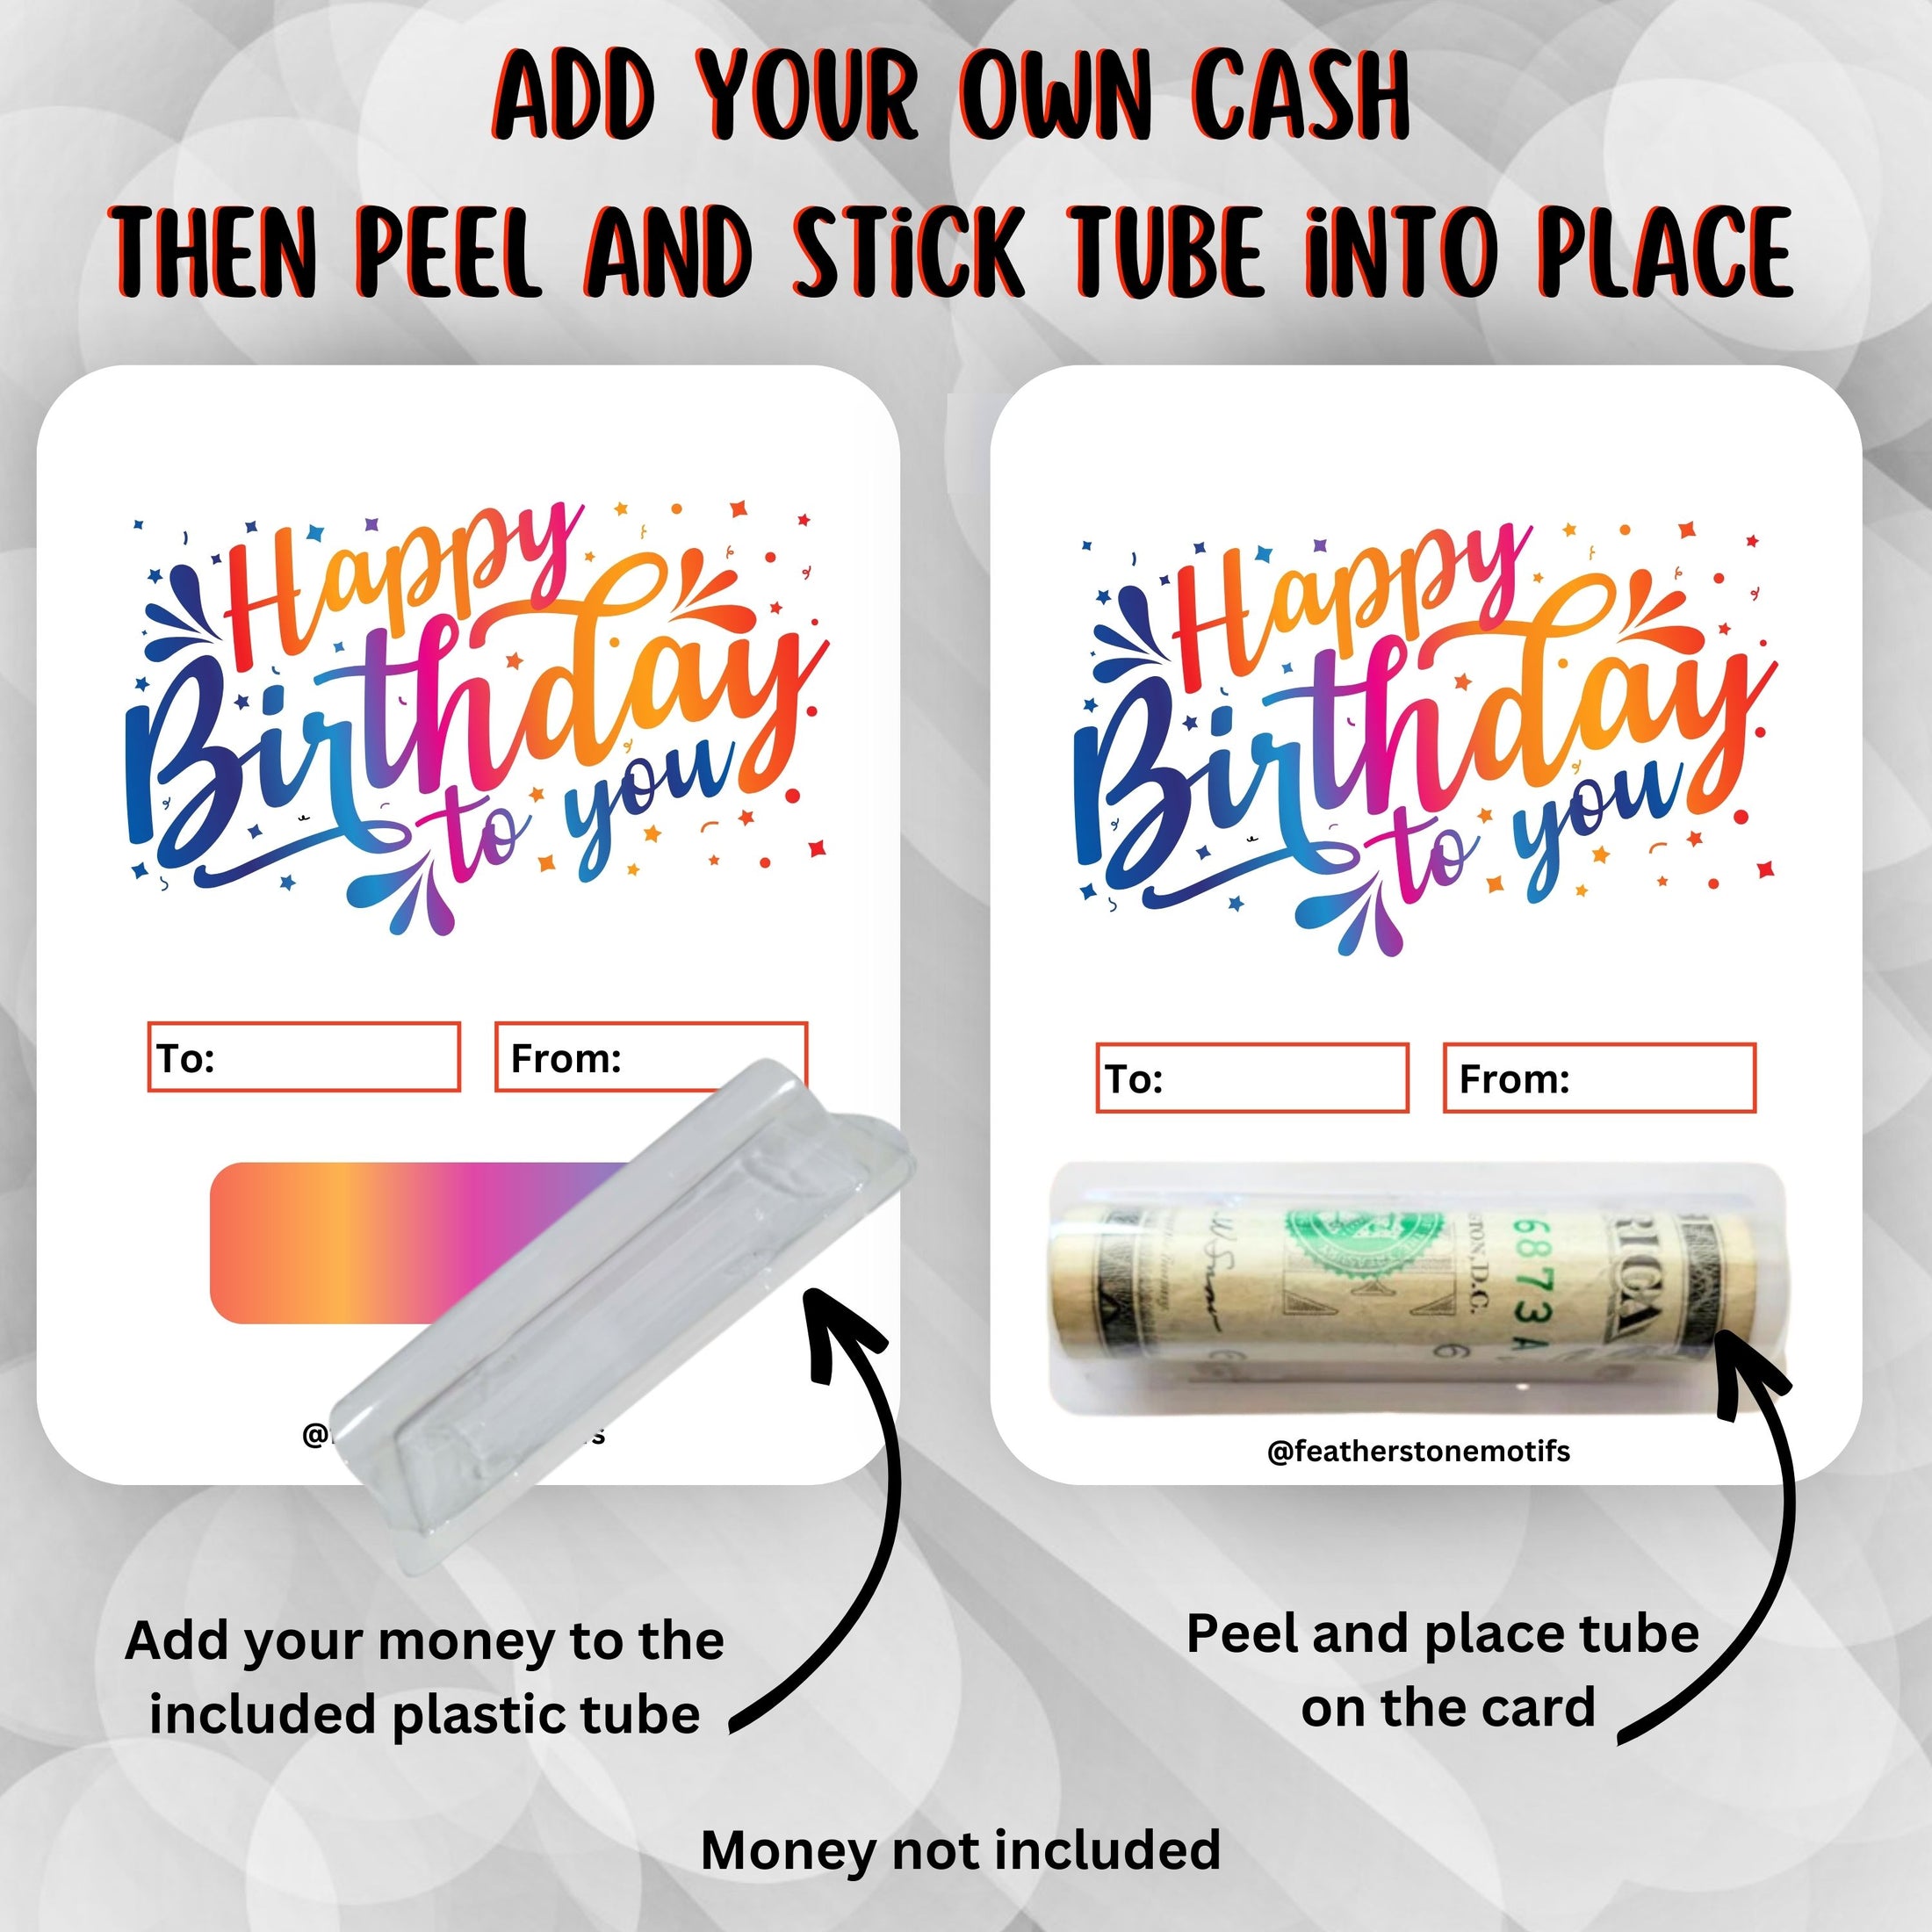 This image shows how to attach the money tube to the Birthday Colorful money card.